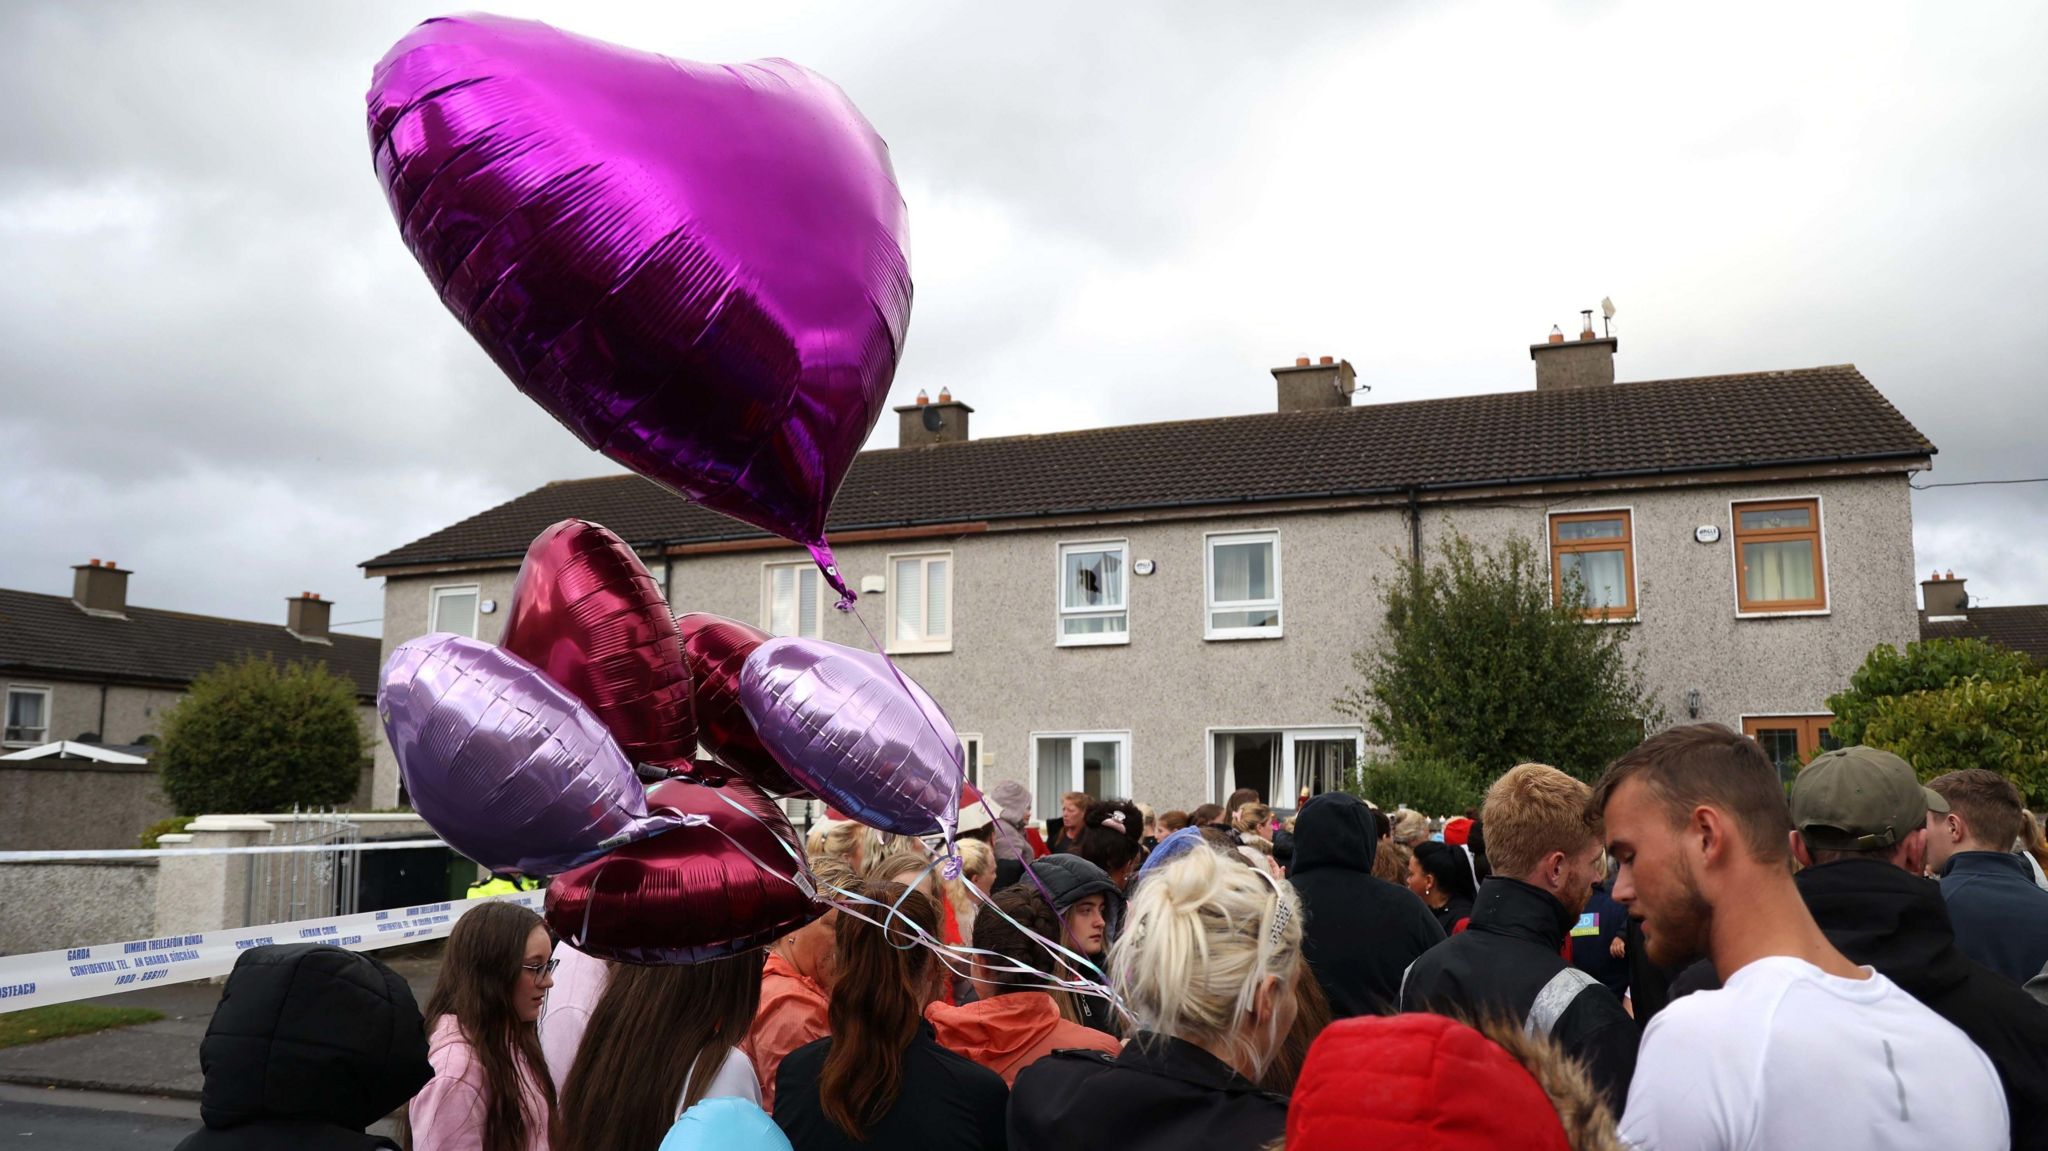 A vigil was held outside the house on Rossfield Avenue hours after the triple murder